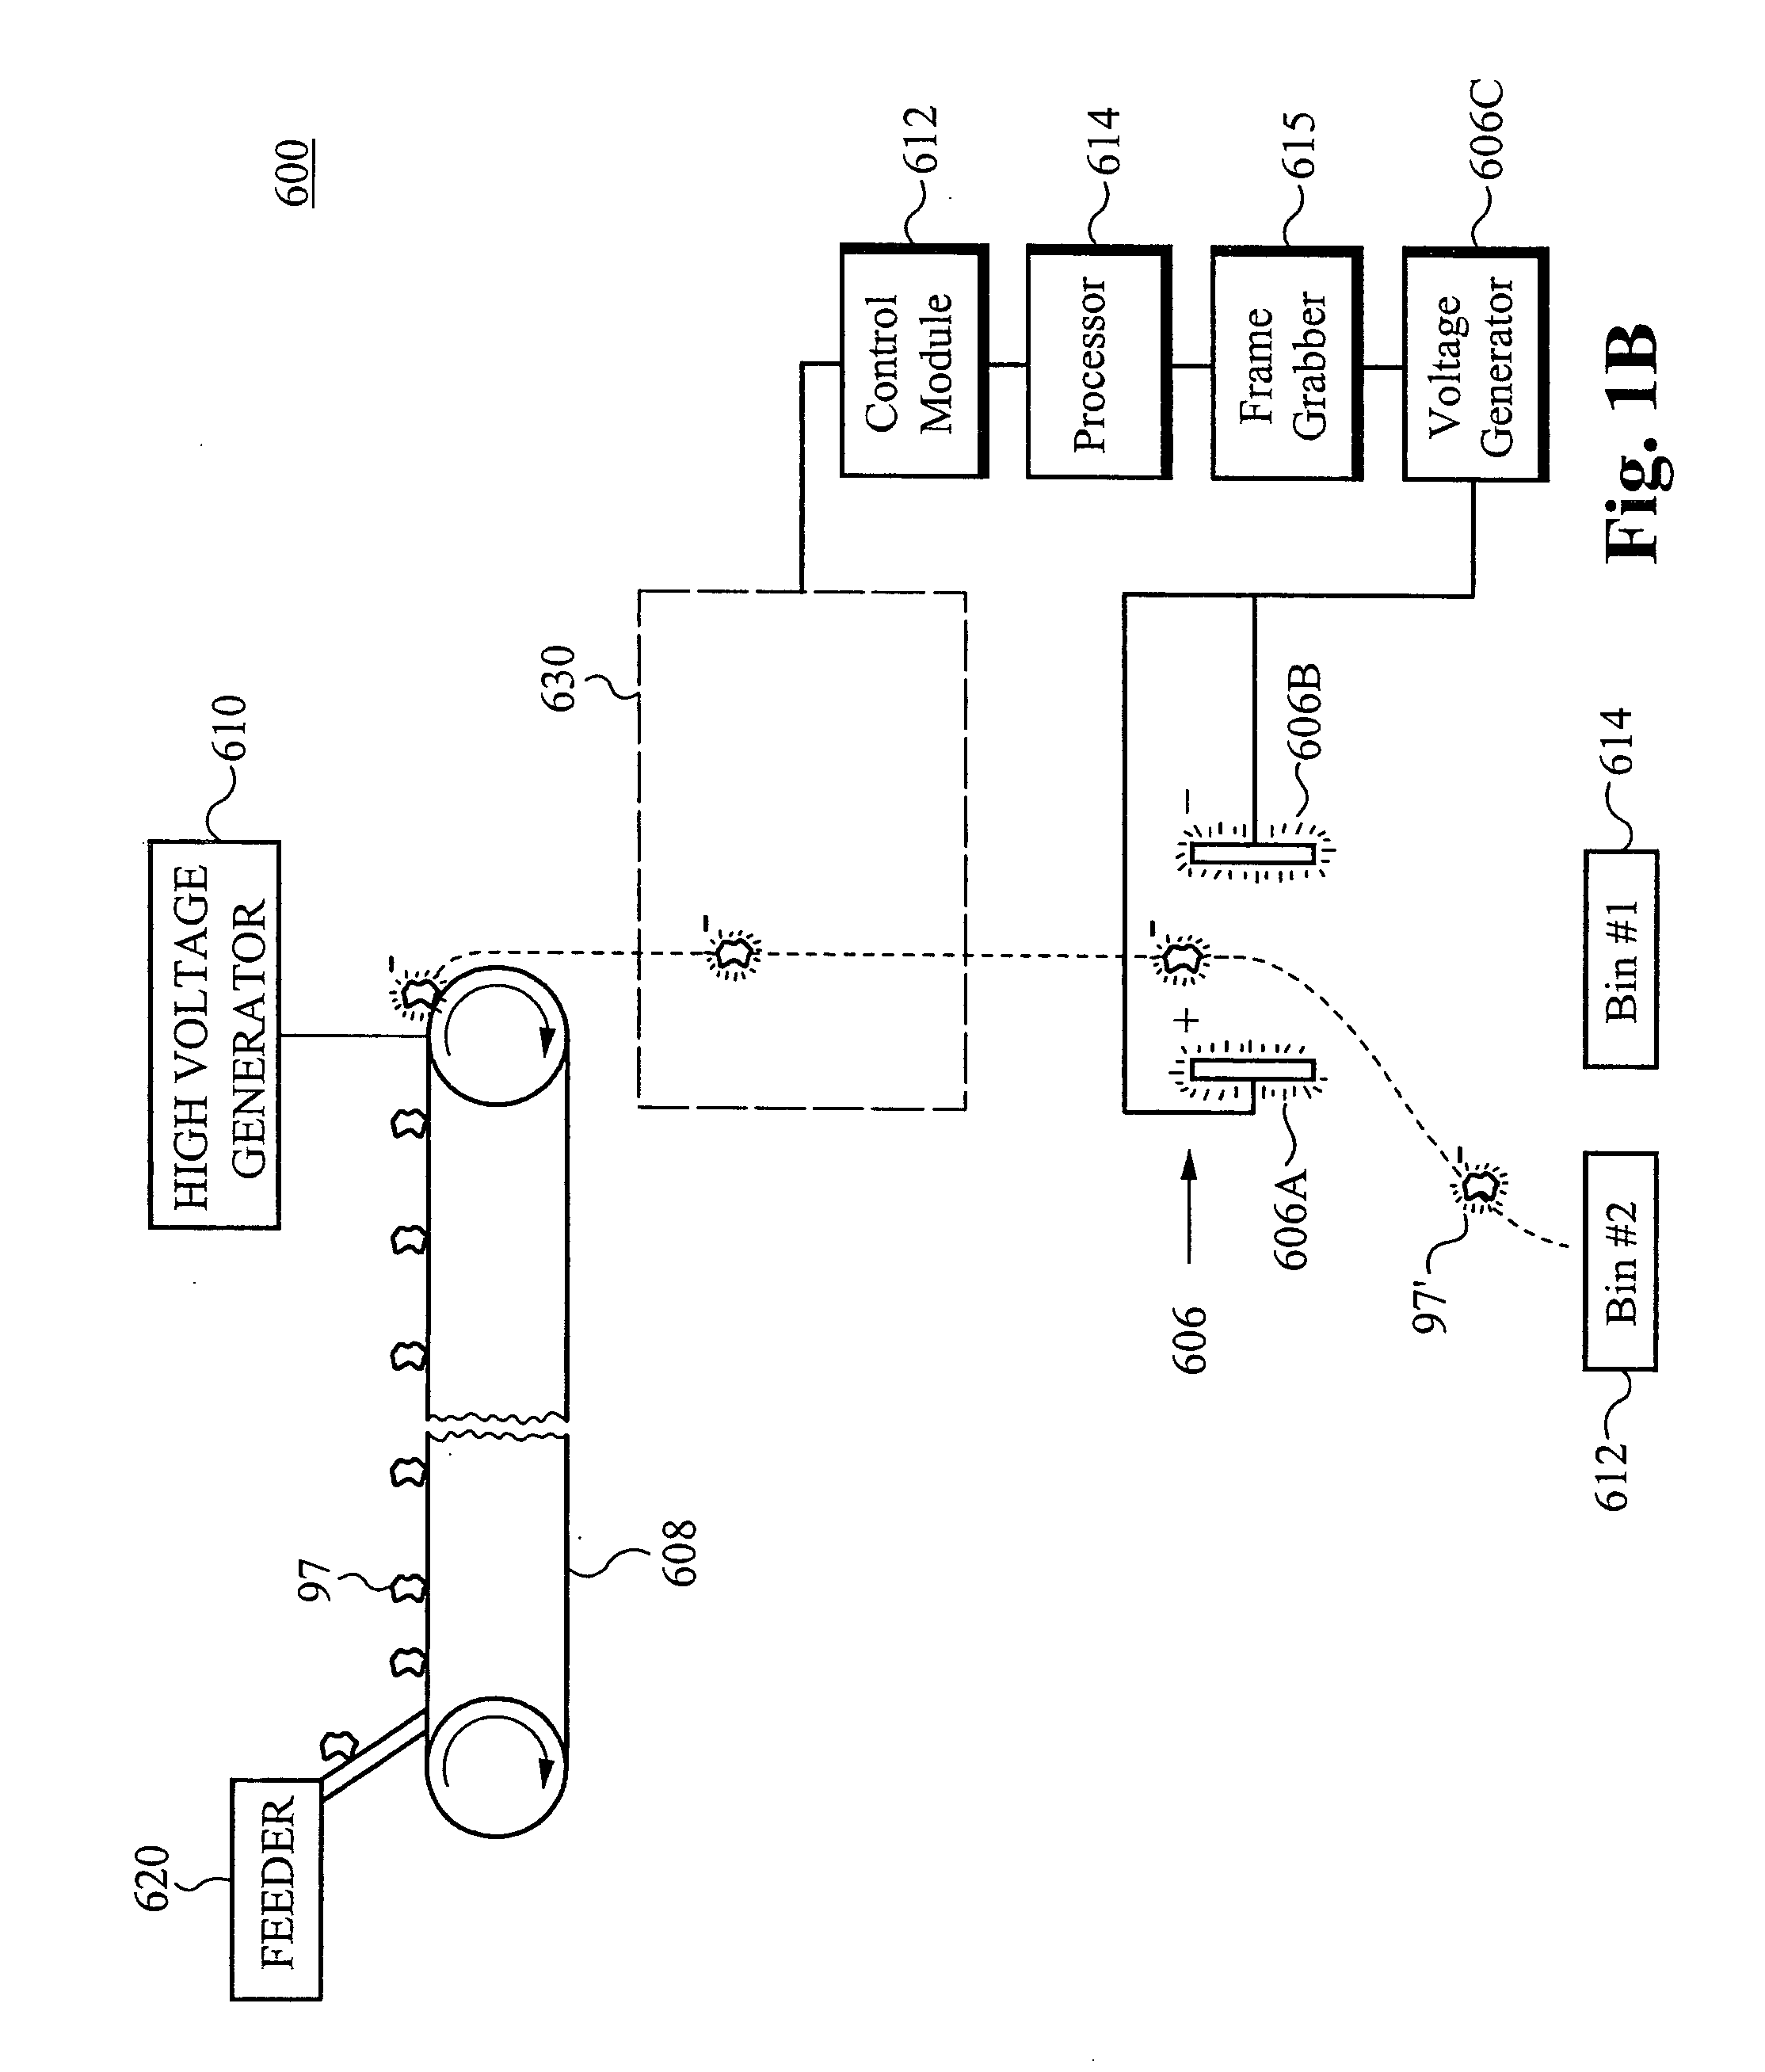 Method of and apparatus for type and color sorting of cullet